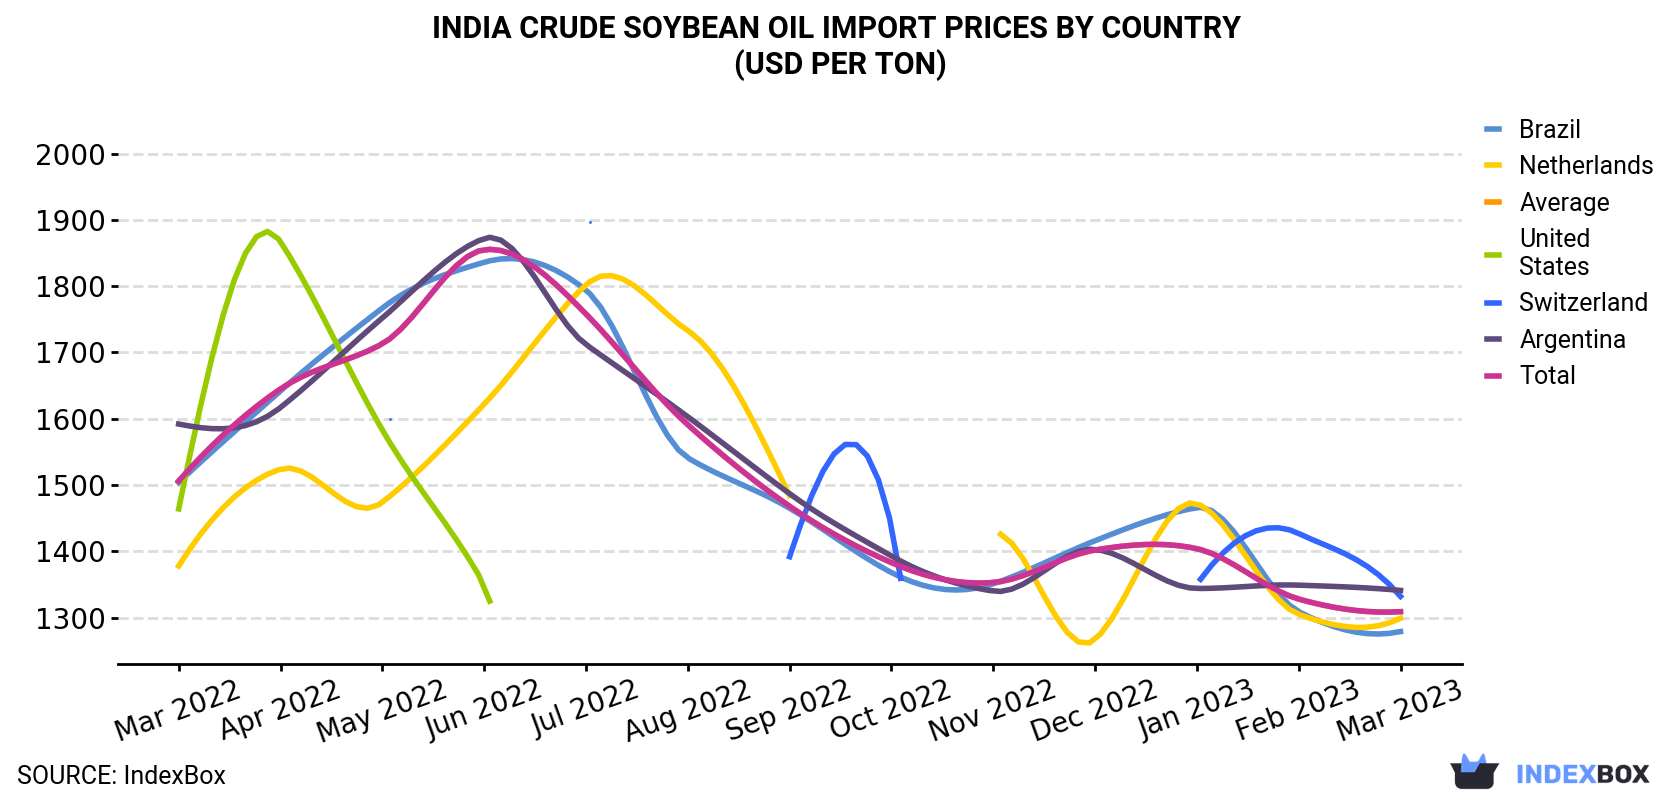 India Crude Soybean Oil Import Prices By Country (USD Per Ton)